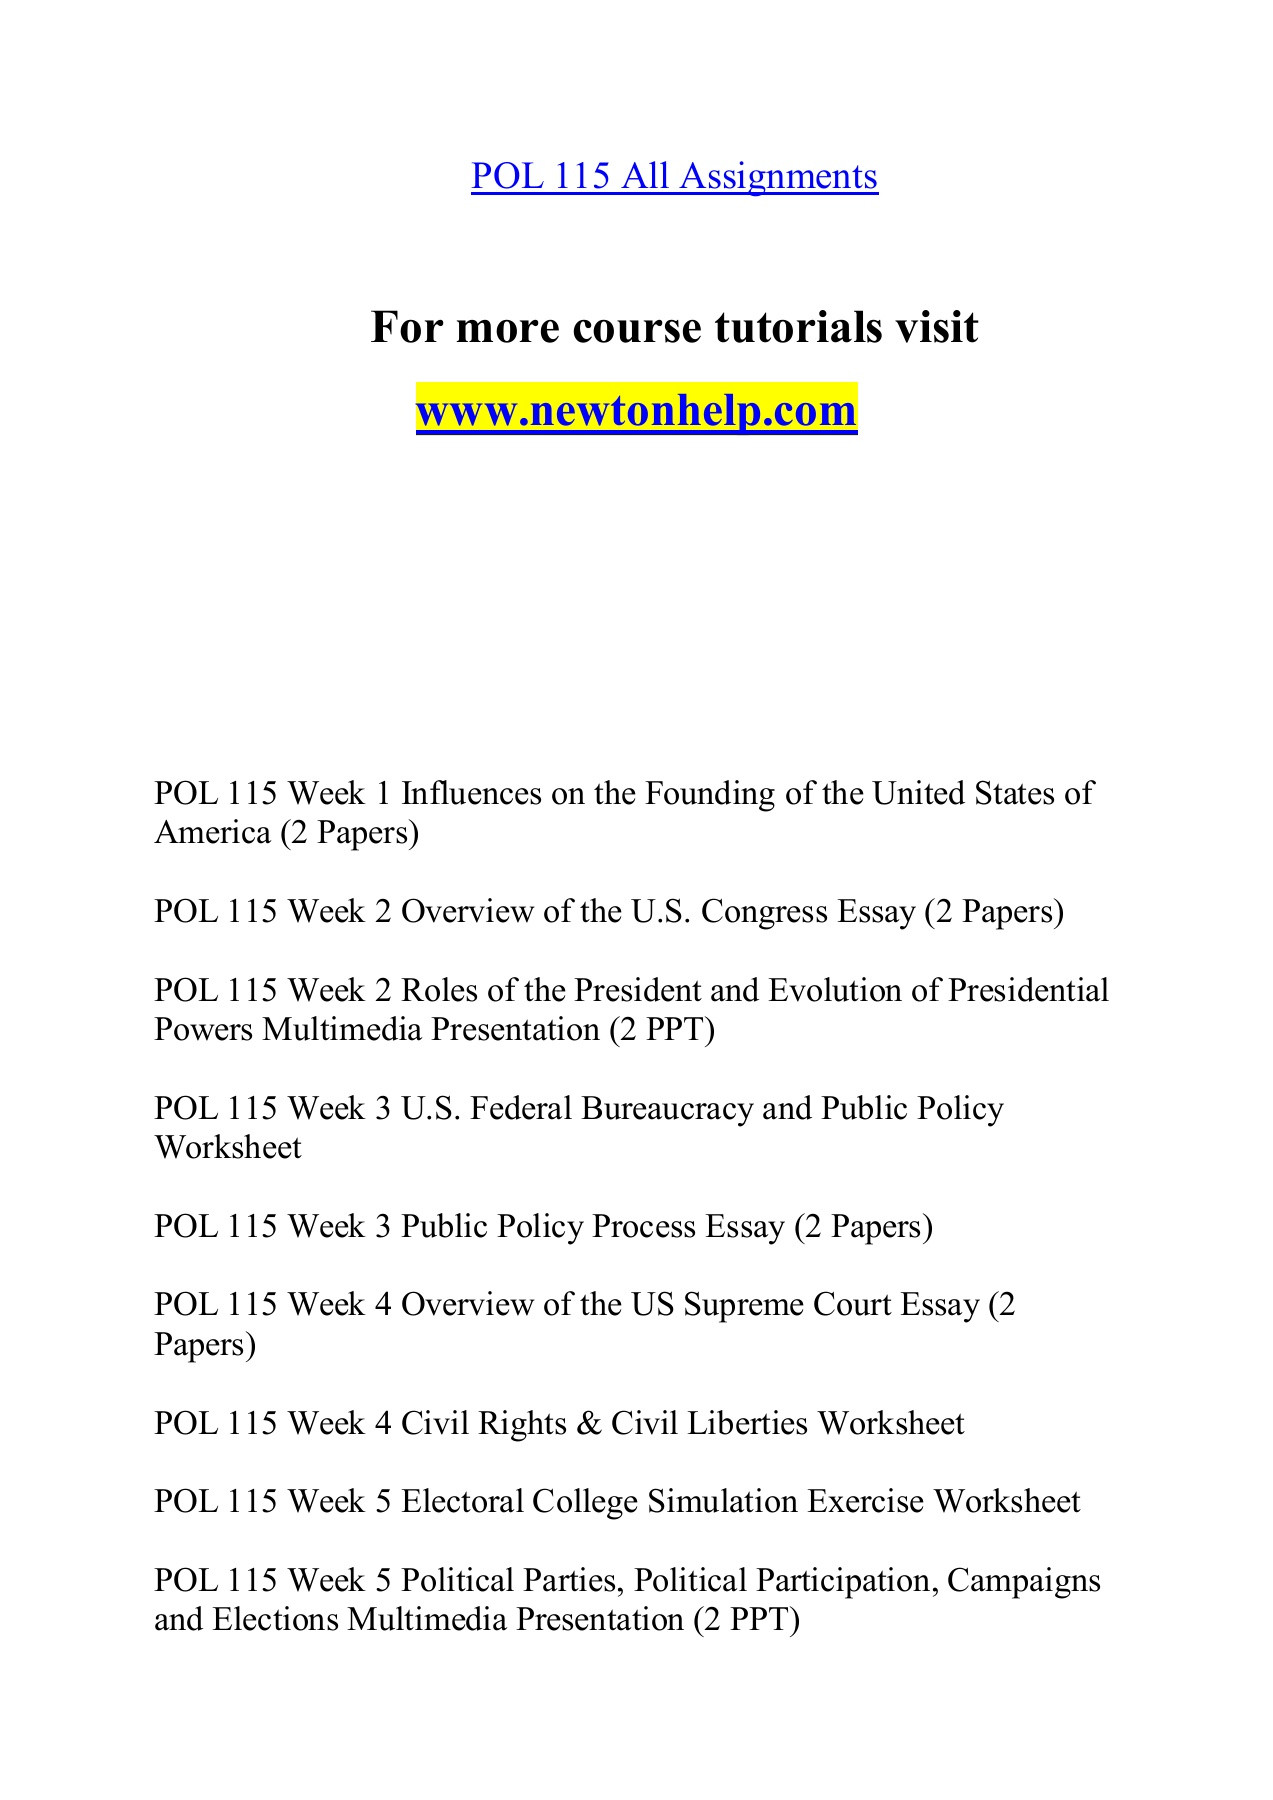 Powers Of Congress Worksheet Pol 115 Dreams E True Newtonhelp Pages 1 17 Text